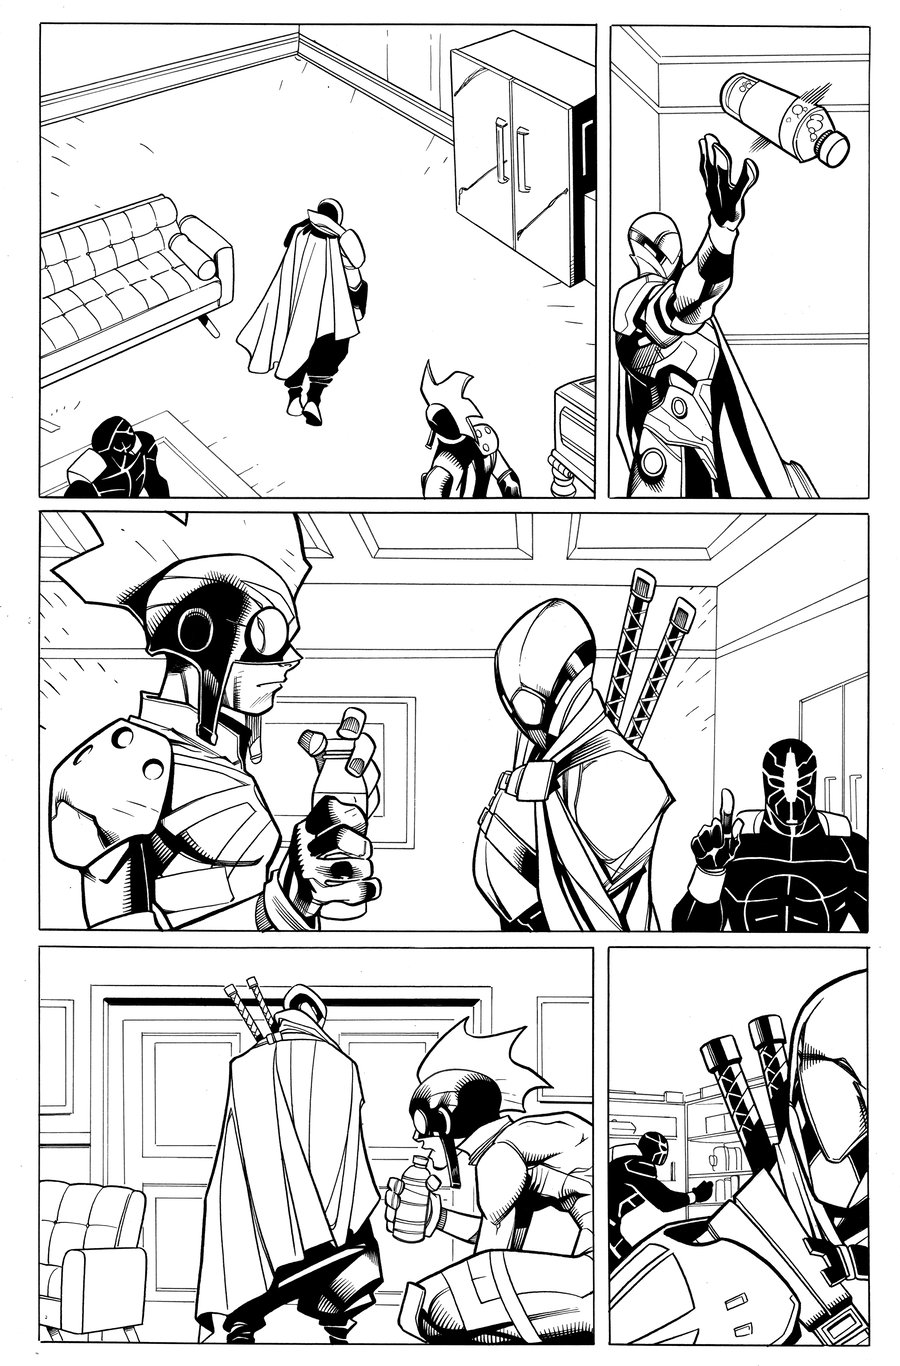 Image of Shadow War Zone #1: Ghostmaker and Clown Hunter PG 09